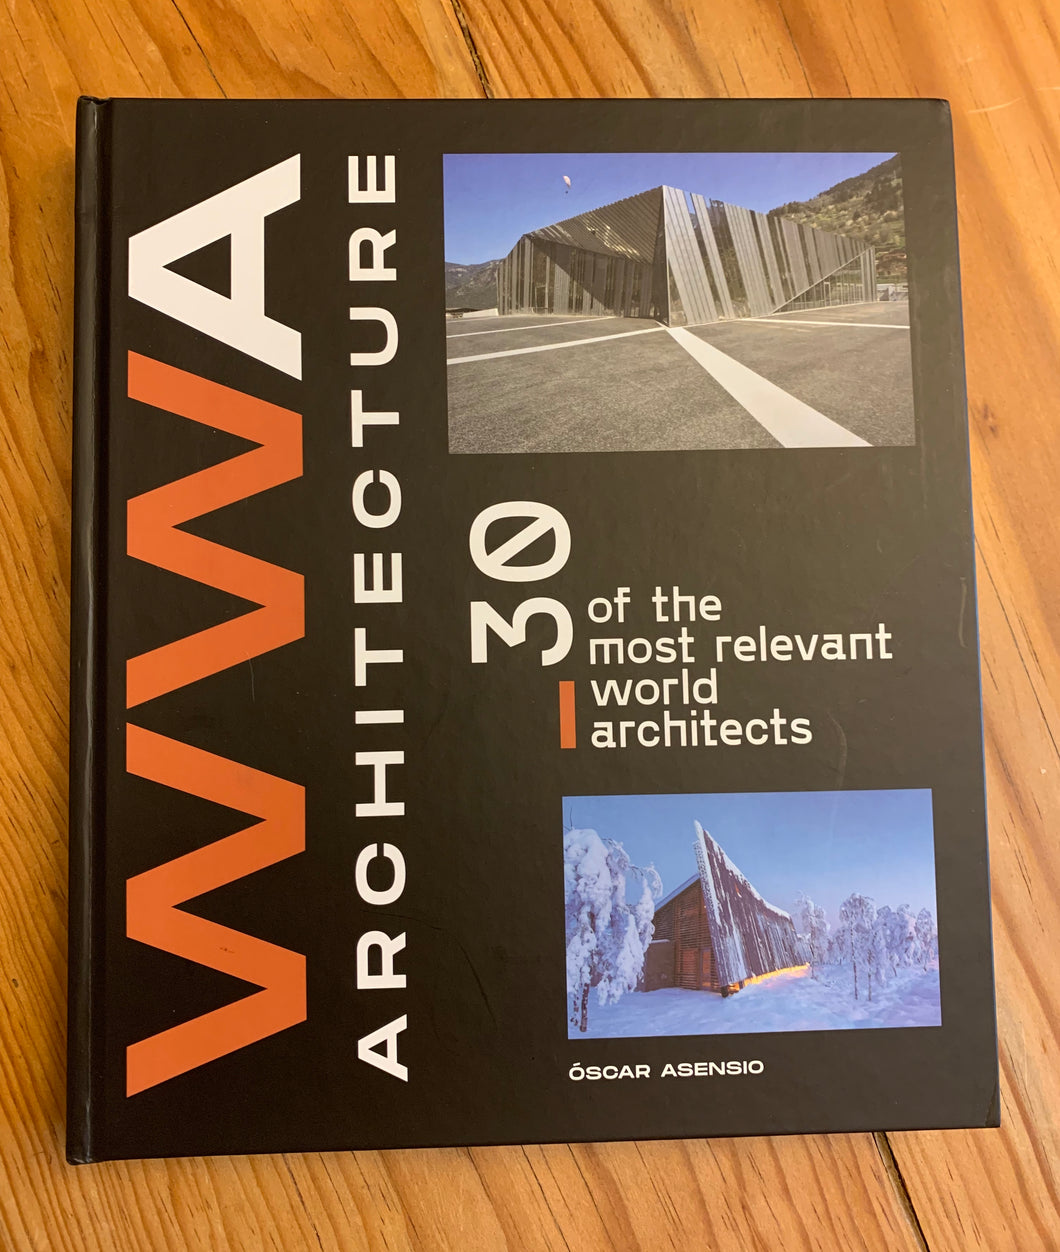 WWA Architecture - 30 of the most relevant world architects